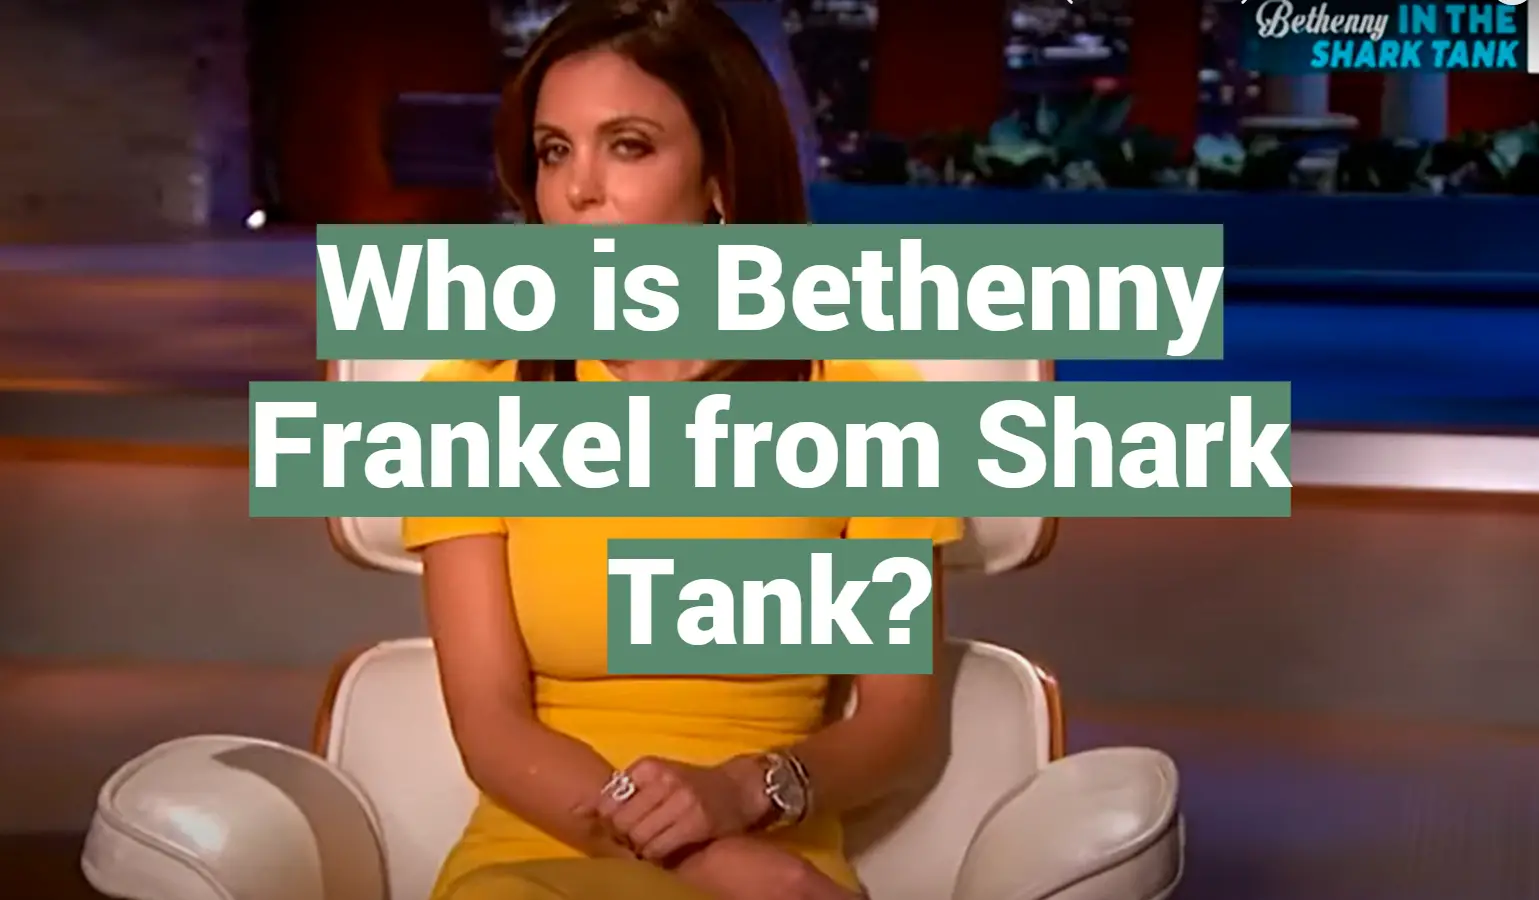 Who is Bethenny Frankel from Shark Tank?